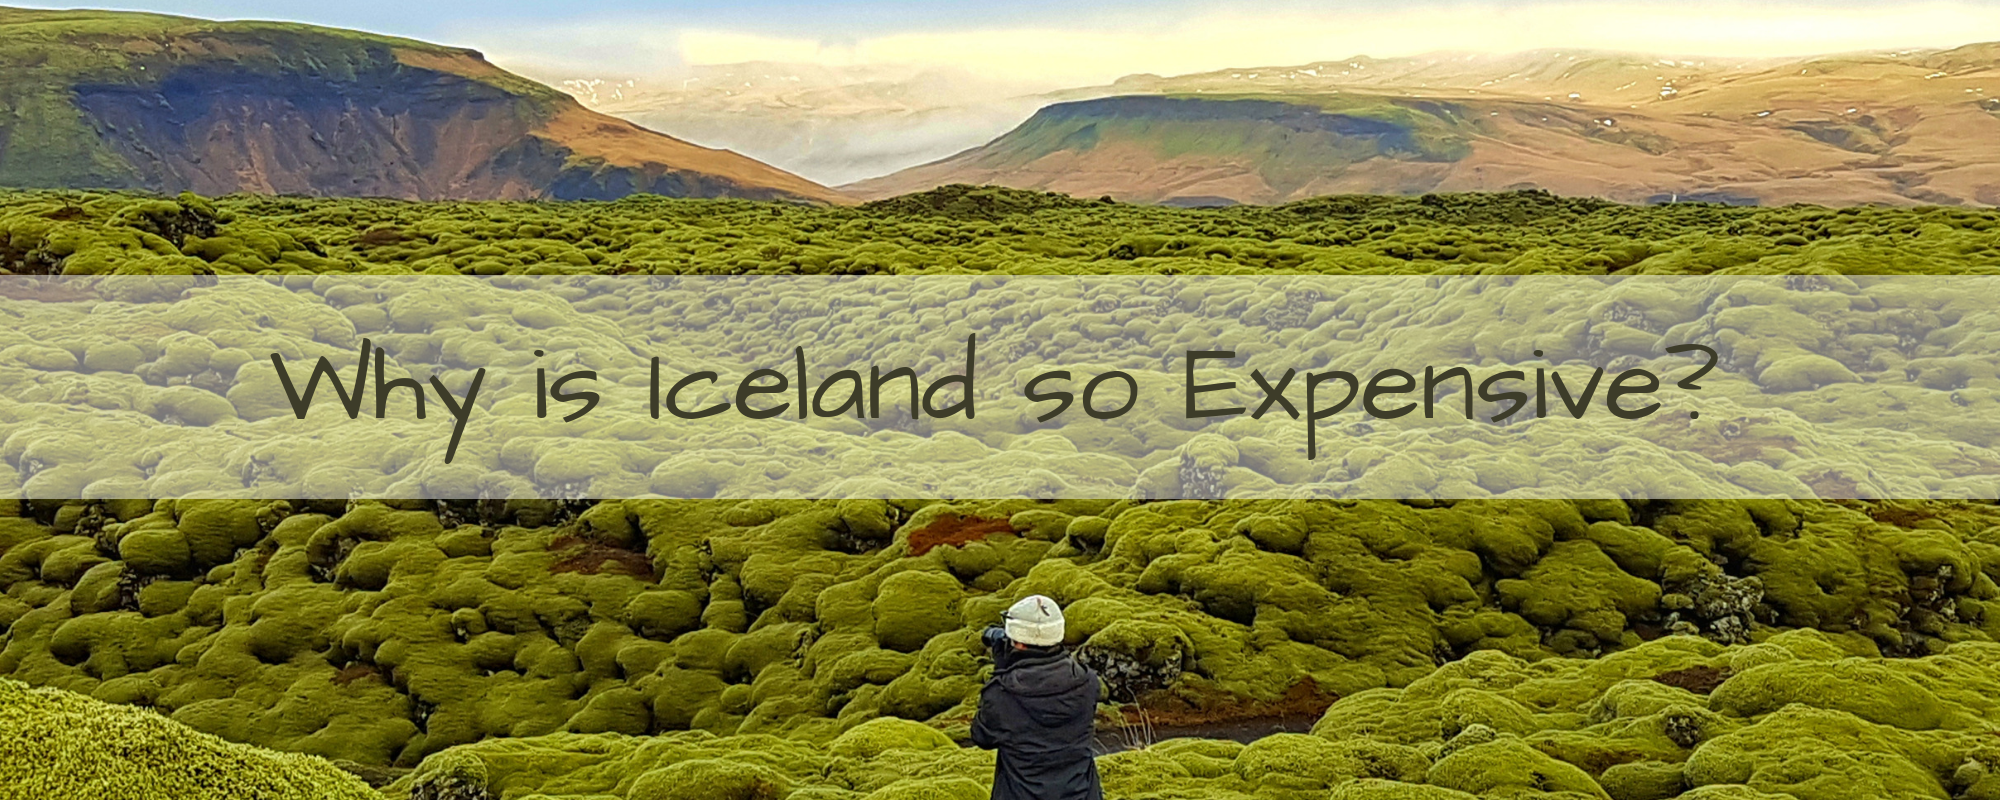 Why Is Iceland So Expensive?